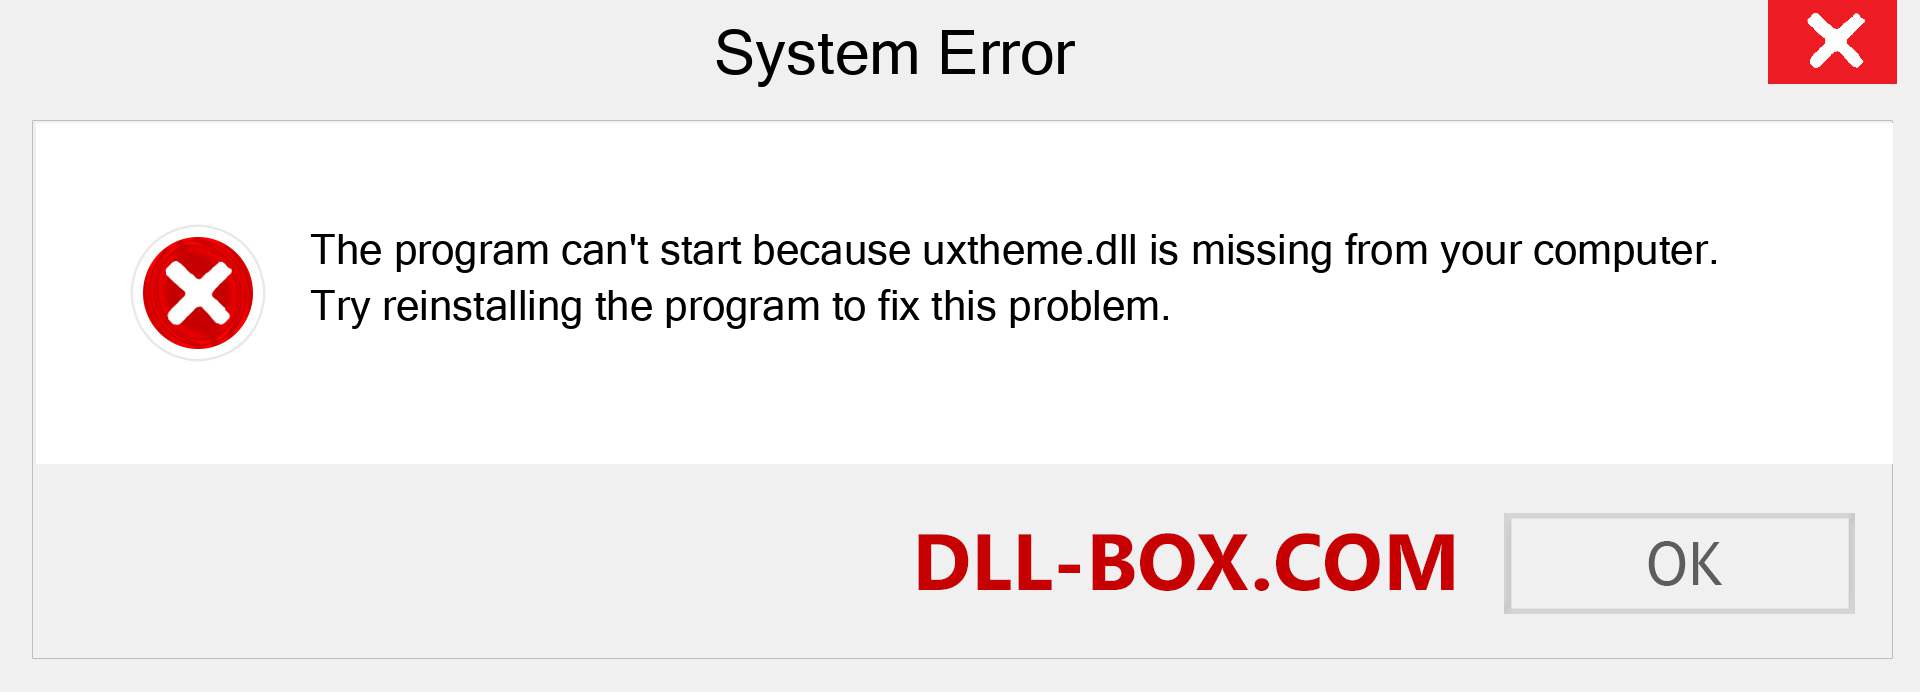  uxtheme.dll file is missing?. Download for Windows 7, 8, 10 - Fix  uxtheme dll Missing Error on Windows, photos, images